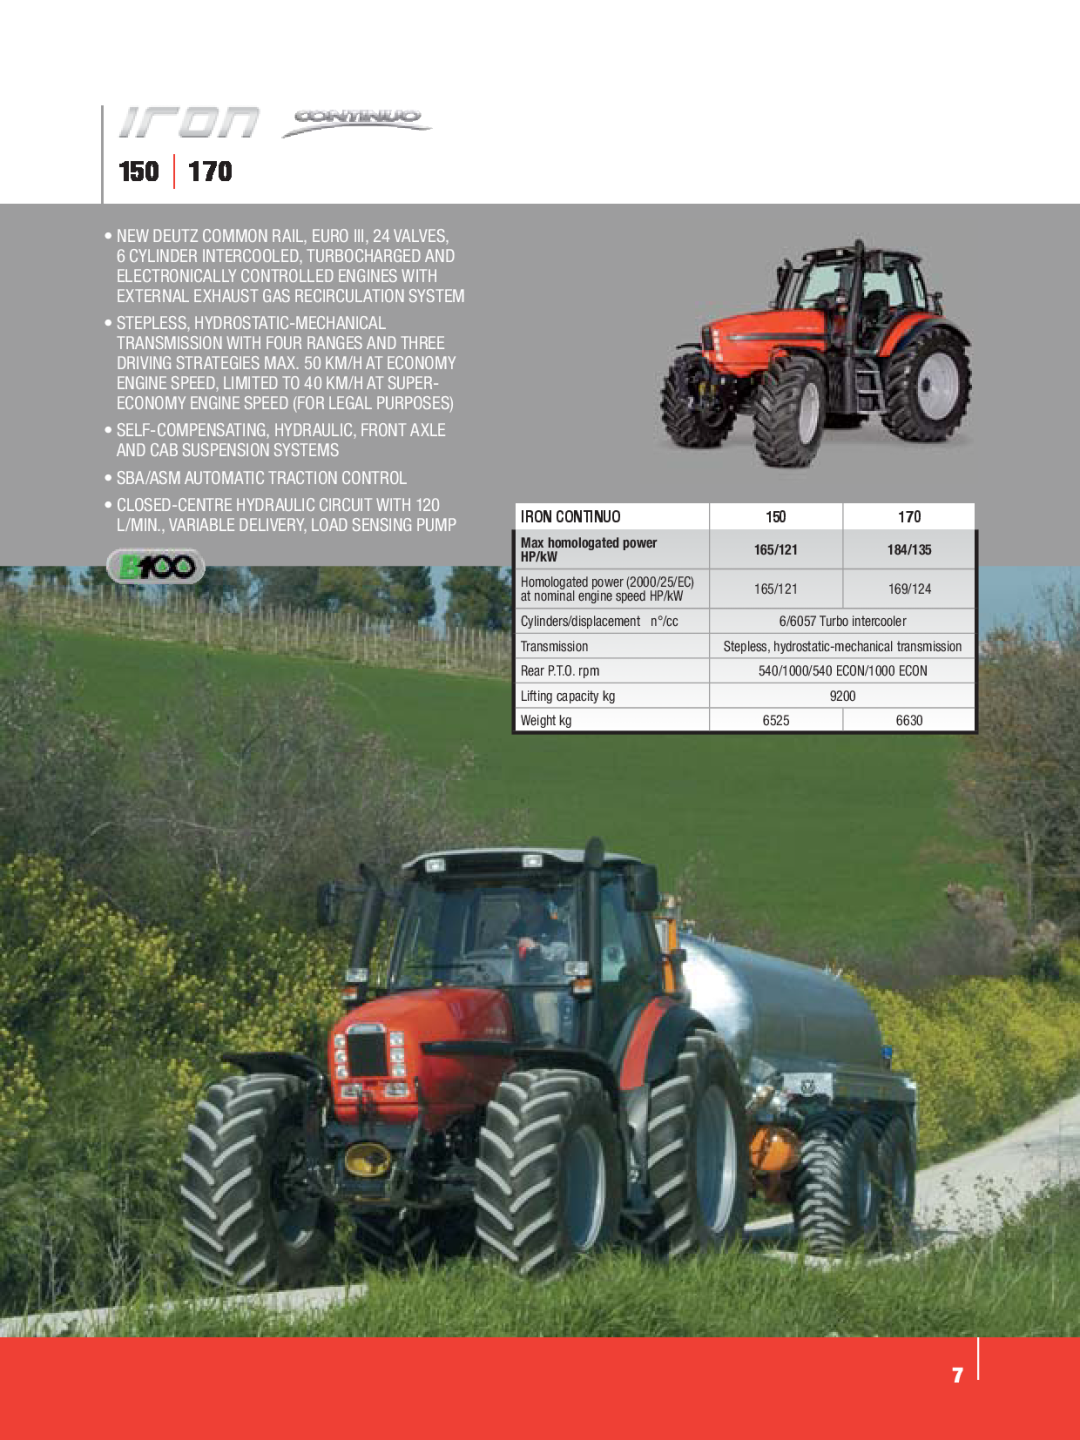 SAME Tractors manual 150170, Sba/Asm Automatic Traction Control, Iron Continuo 